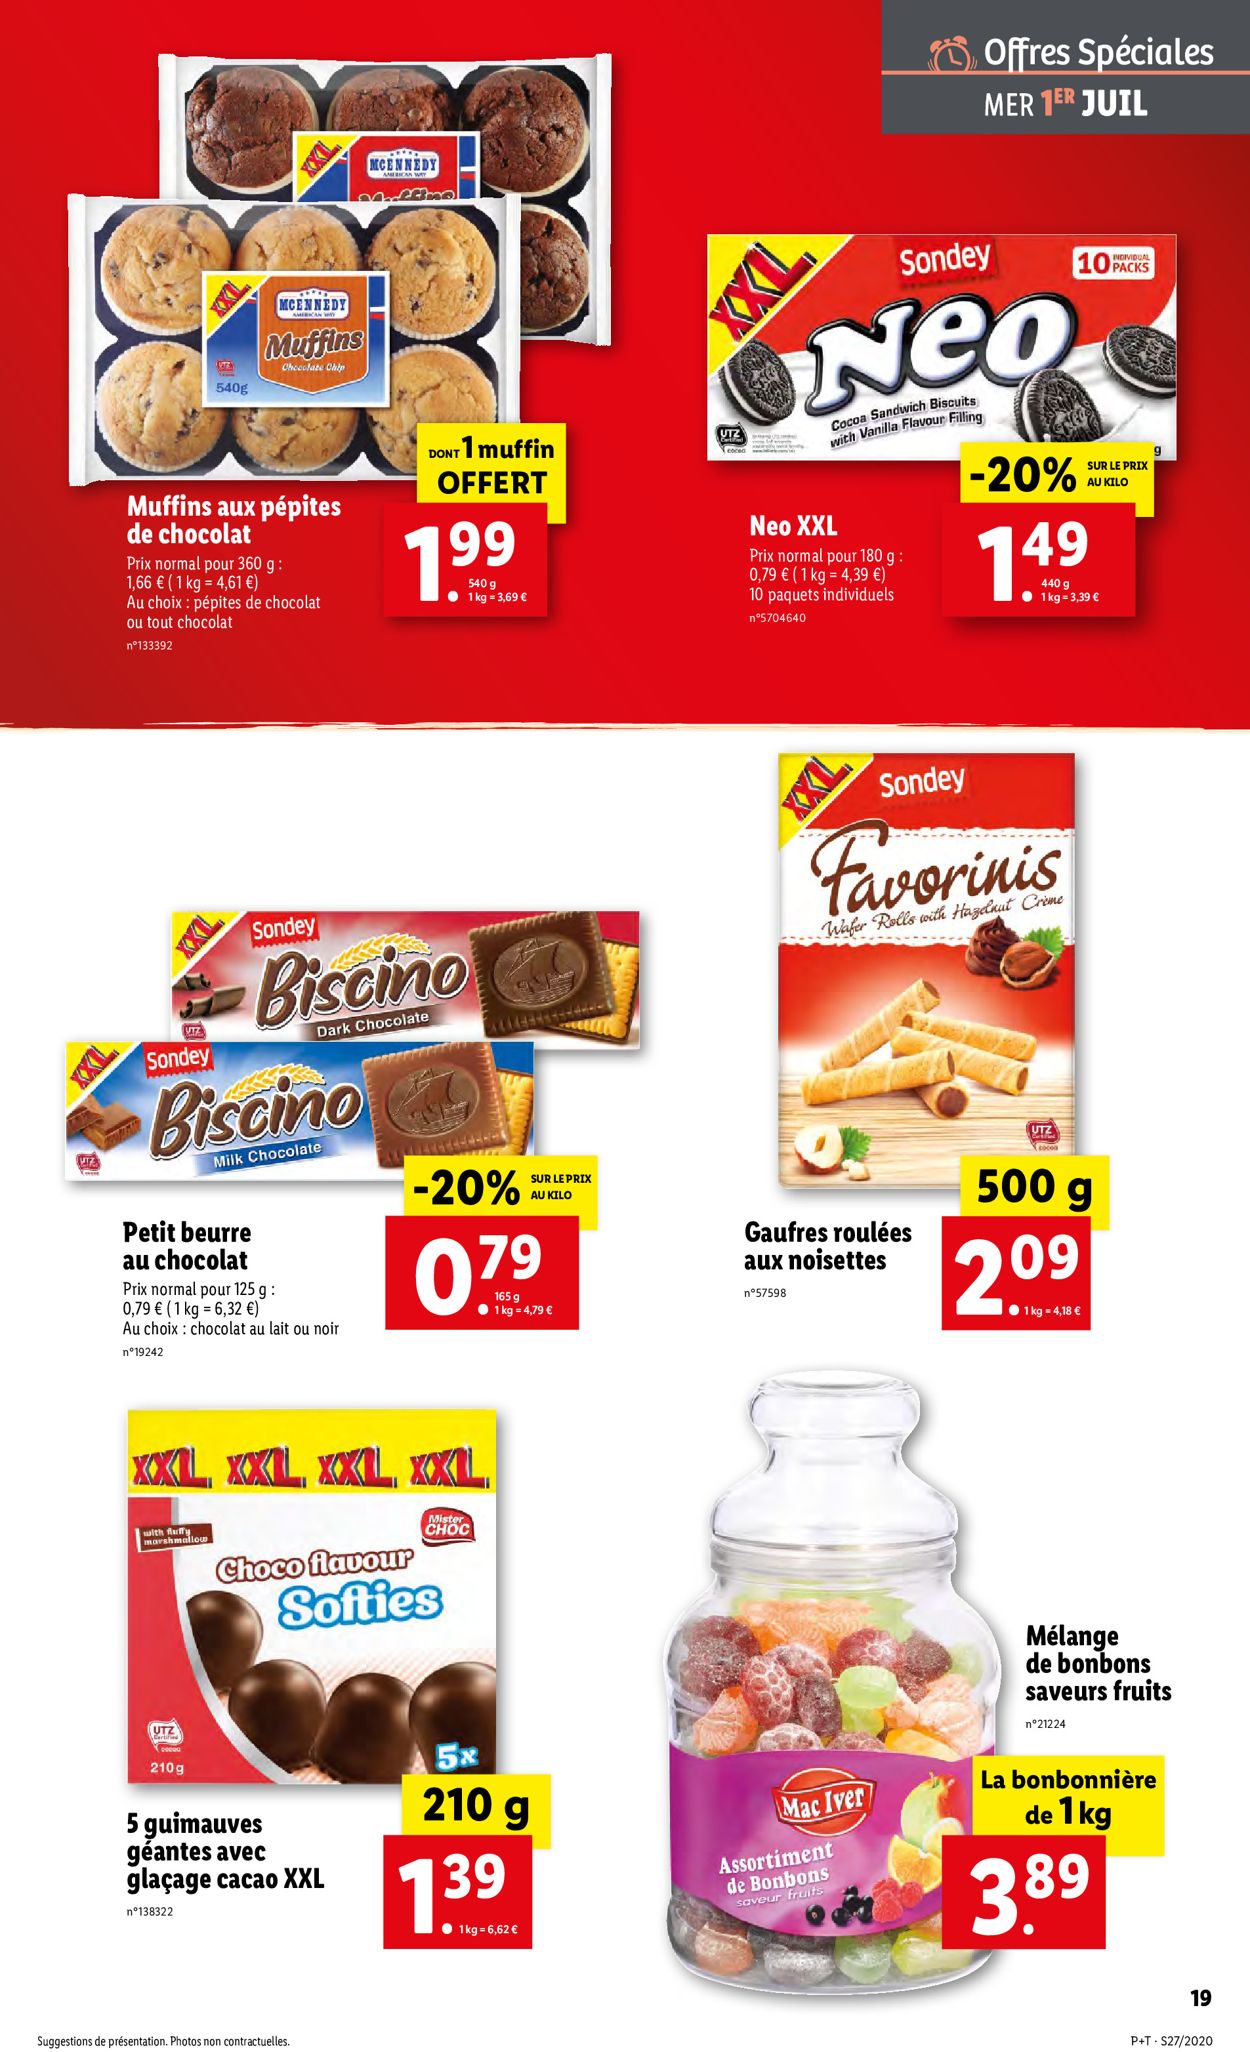 Lidl Catalogue - 01.07-07.07.2020 (Page 19)